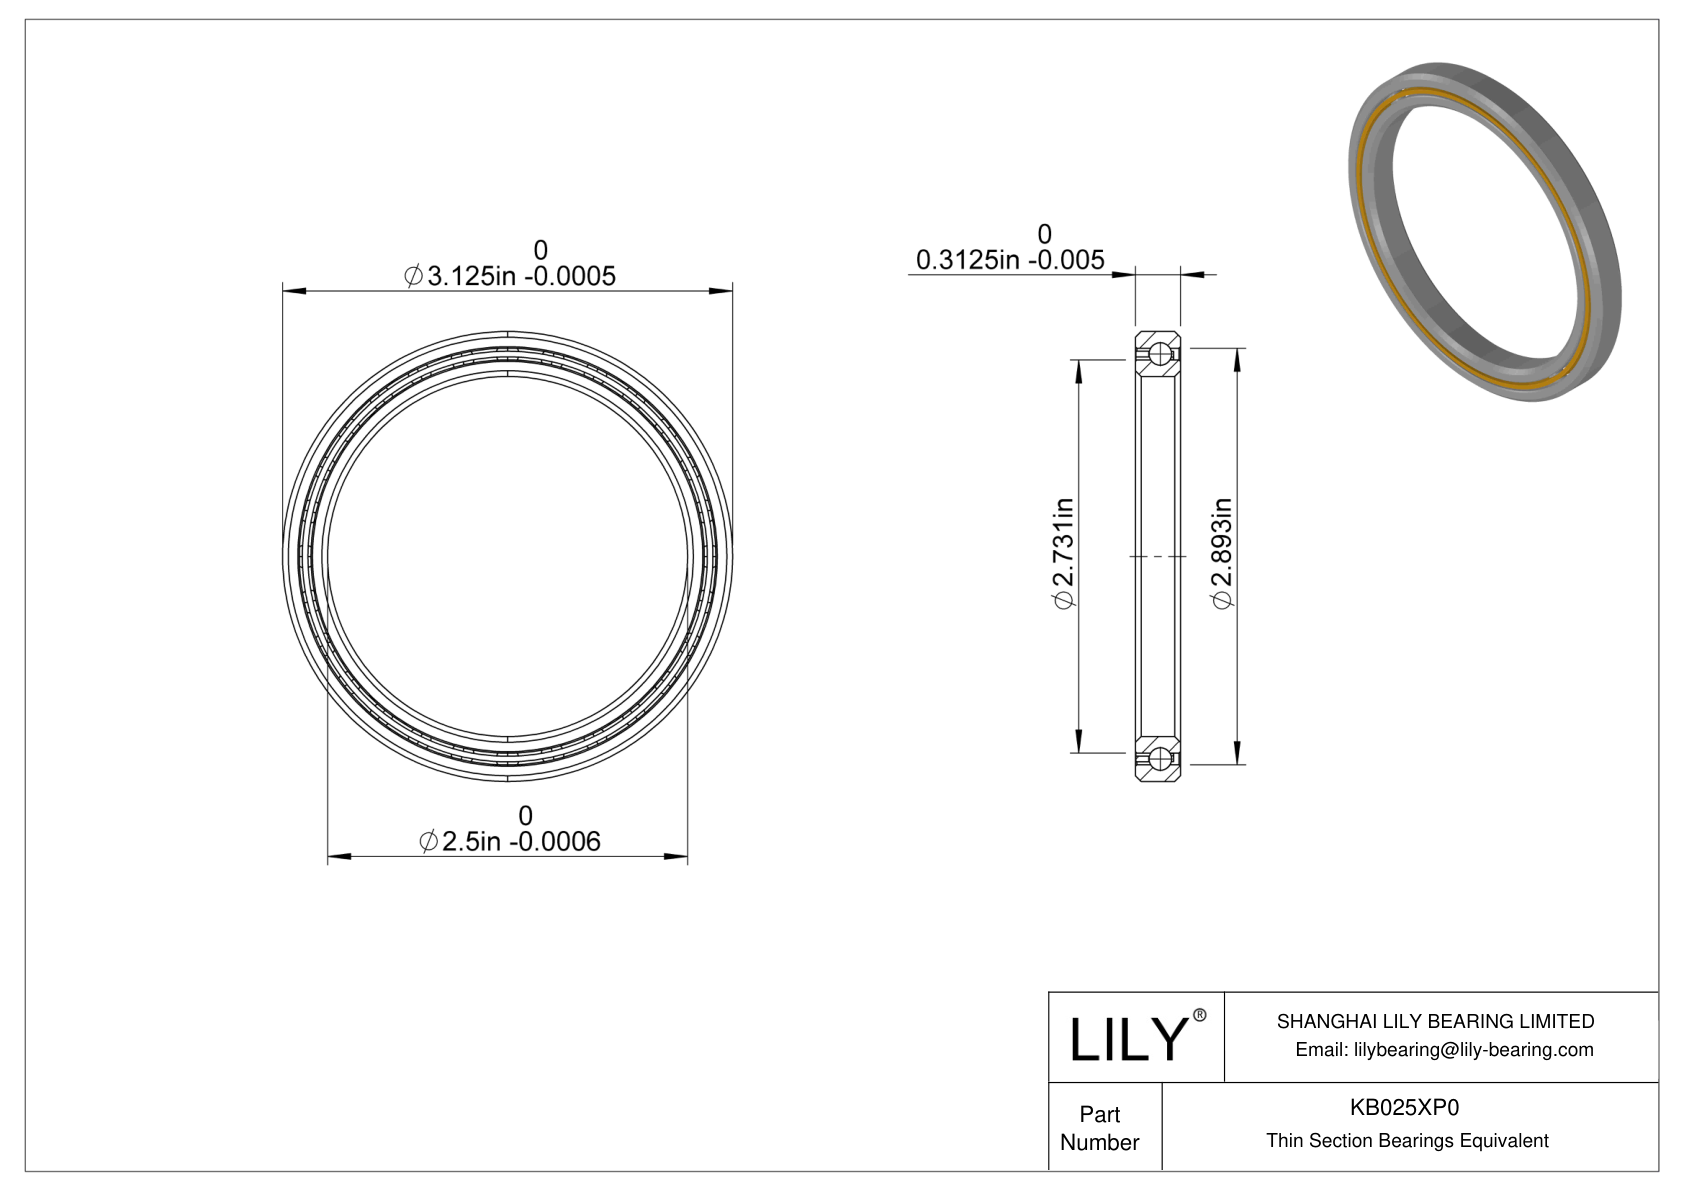 KB025XP0 Constant Section (CS) Bearings cad drawing